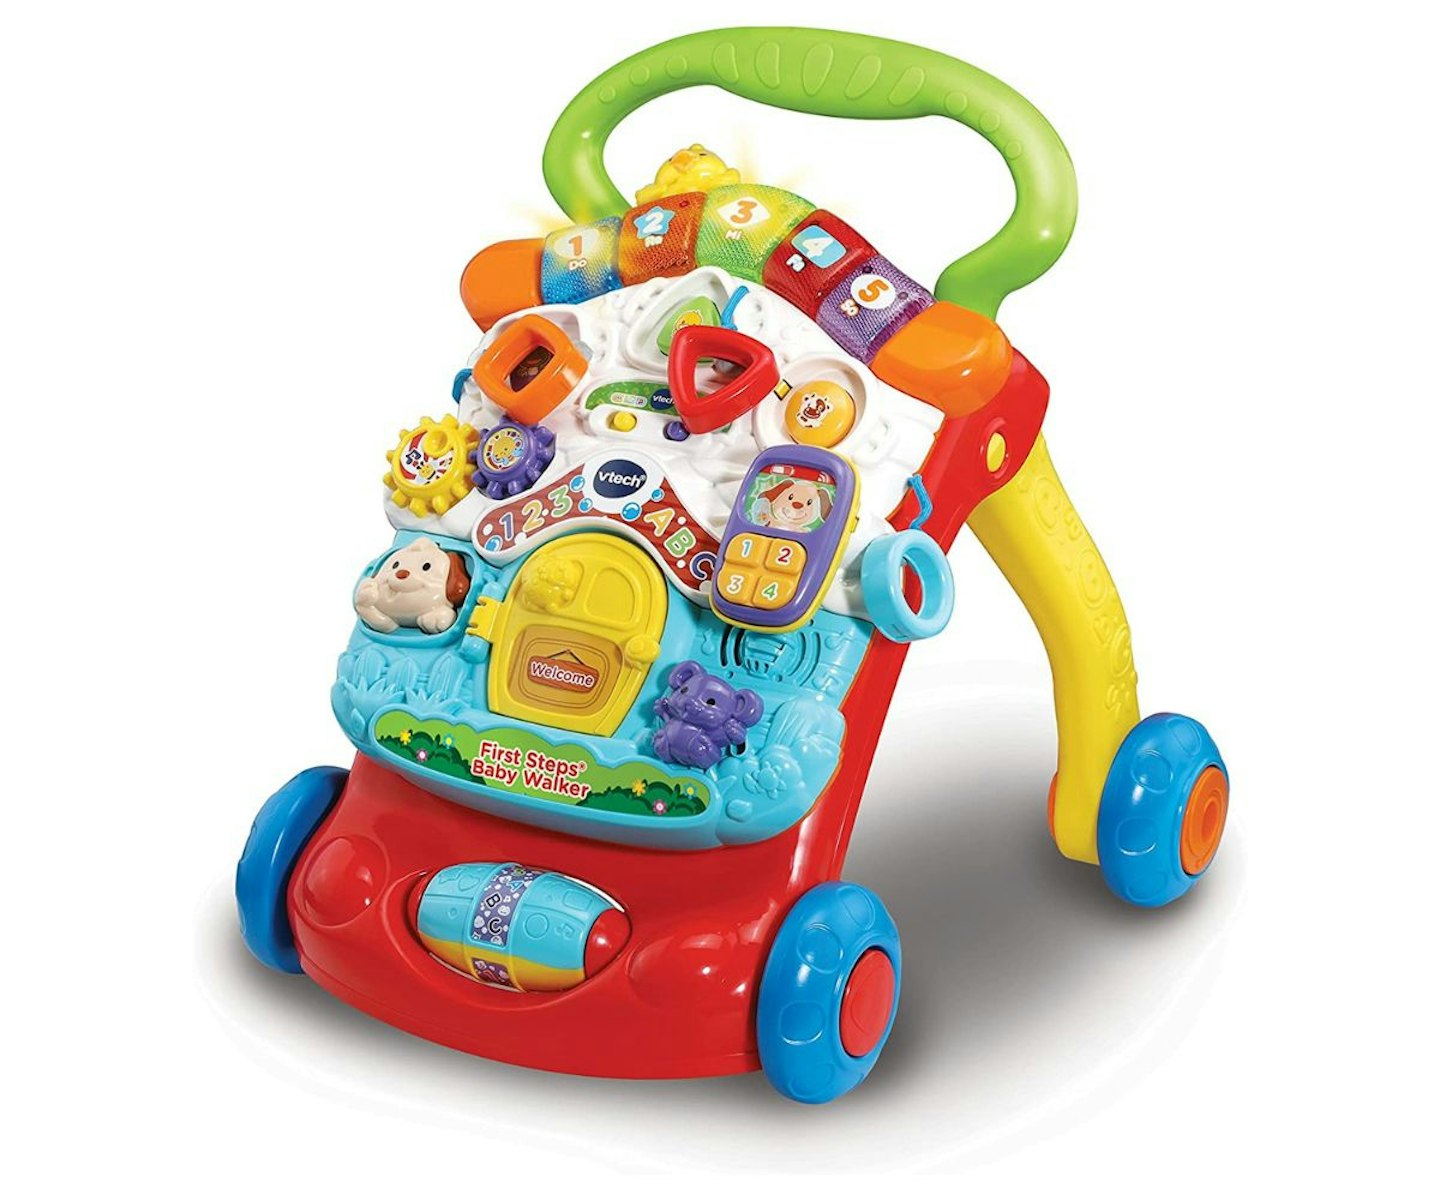 The Best Toys For A 6 Month Old To 12